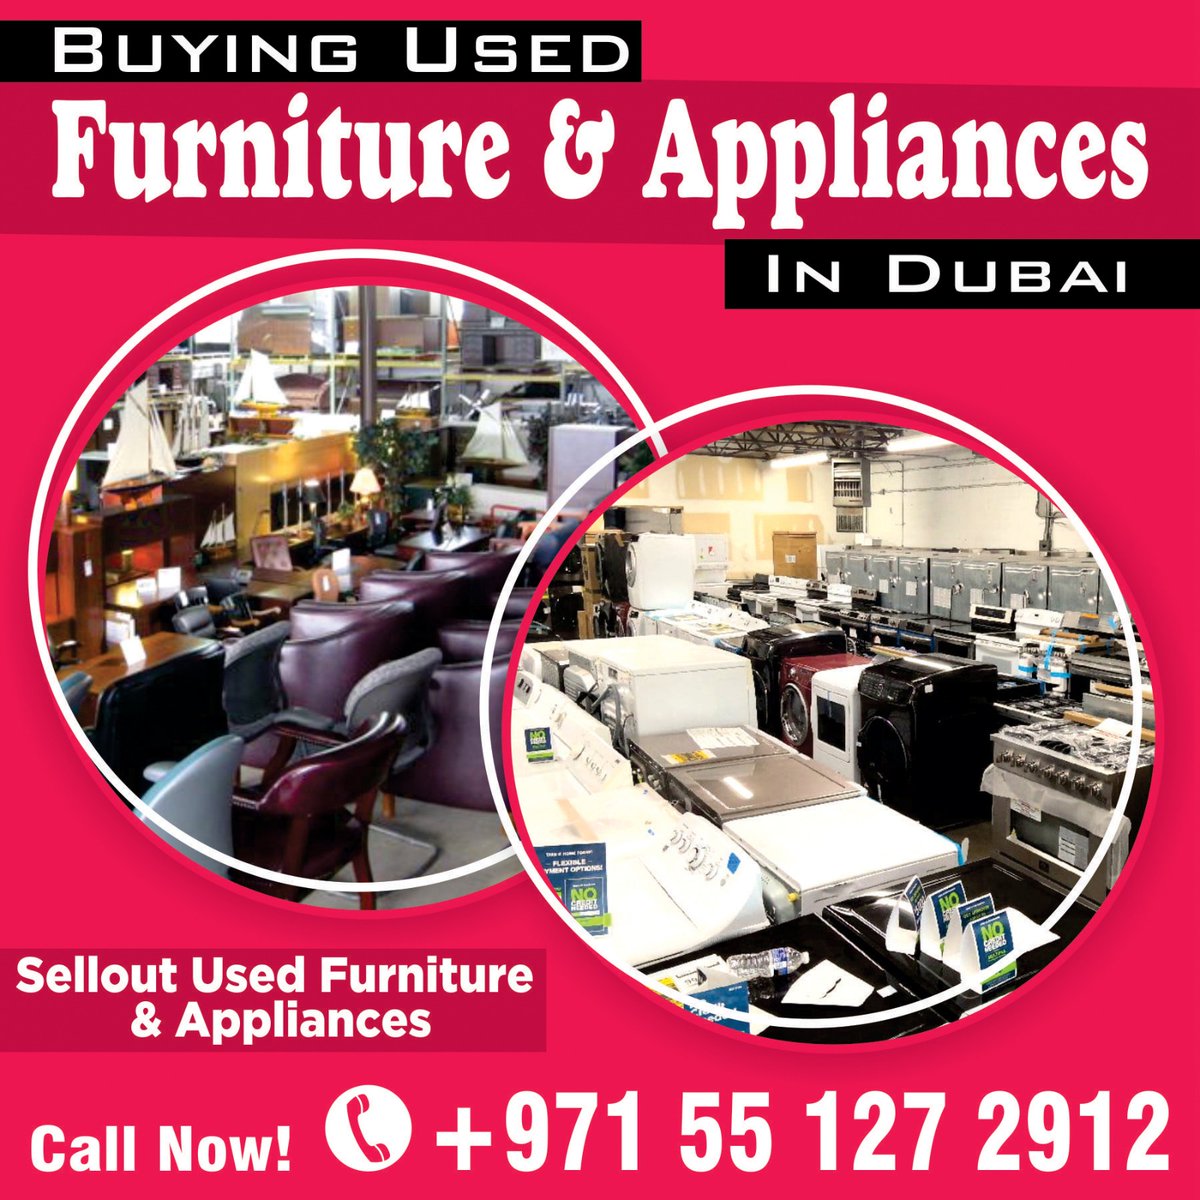 Are you looking to upgrade your furniture and appliances in Dubai? Why not sell your gently used items and make some extra cash?
So why let your used furniture and appliances gather dust when you could turn them into cash?
For details: 0551272912
#usedfurniture #usedappliances